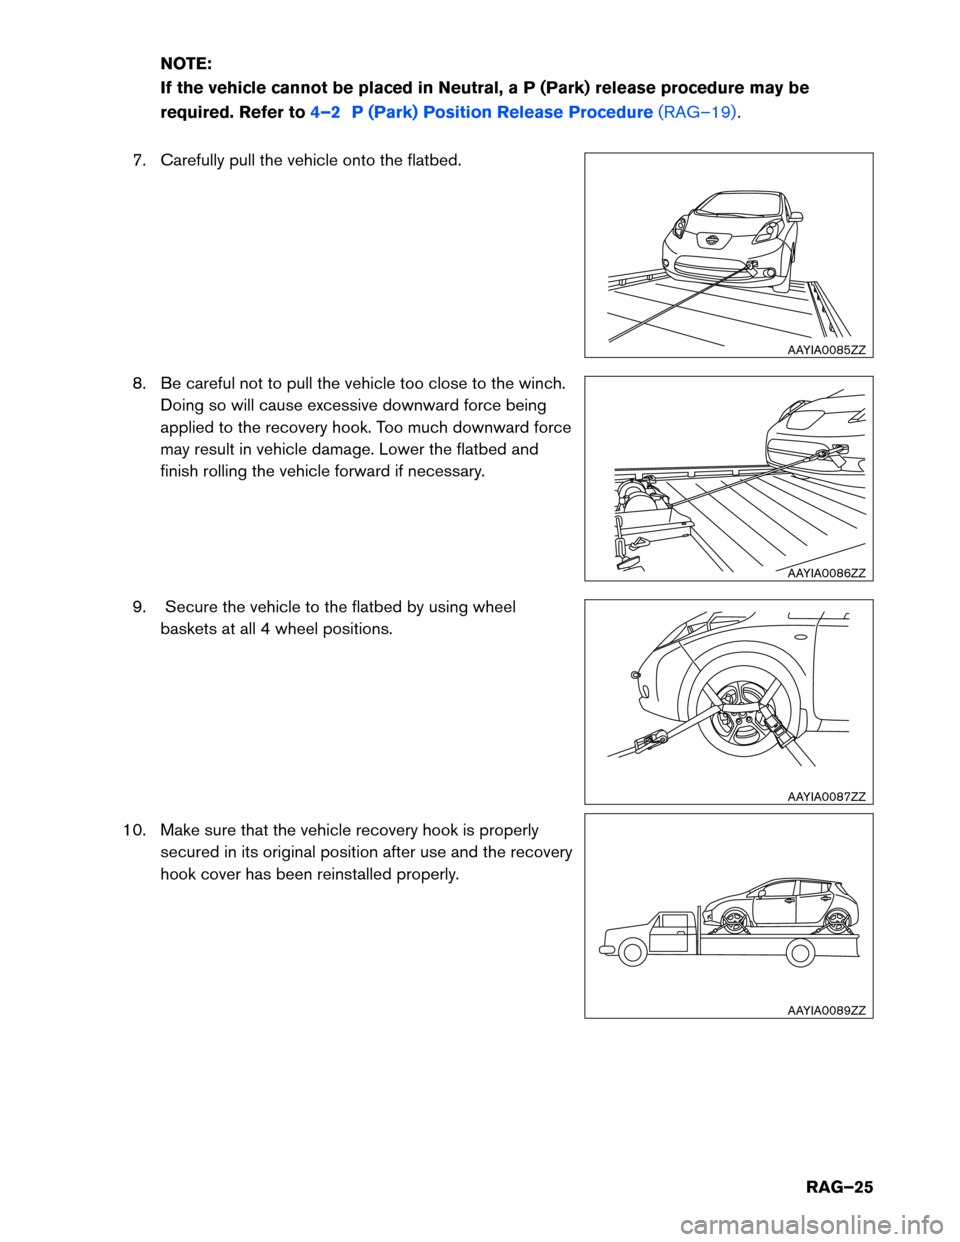 NISSAN LEAF 2014 1.G Roadside Assistance Guide NOTE:
If
the vehicle cannot be placed in Neutral, a P (Park) release procedure may be
required. Refer to 4–2 P (Park) Position Release Procedure (RAG–19).
7.

Carefully pull the vehicle onto the f